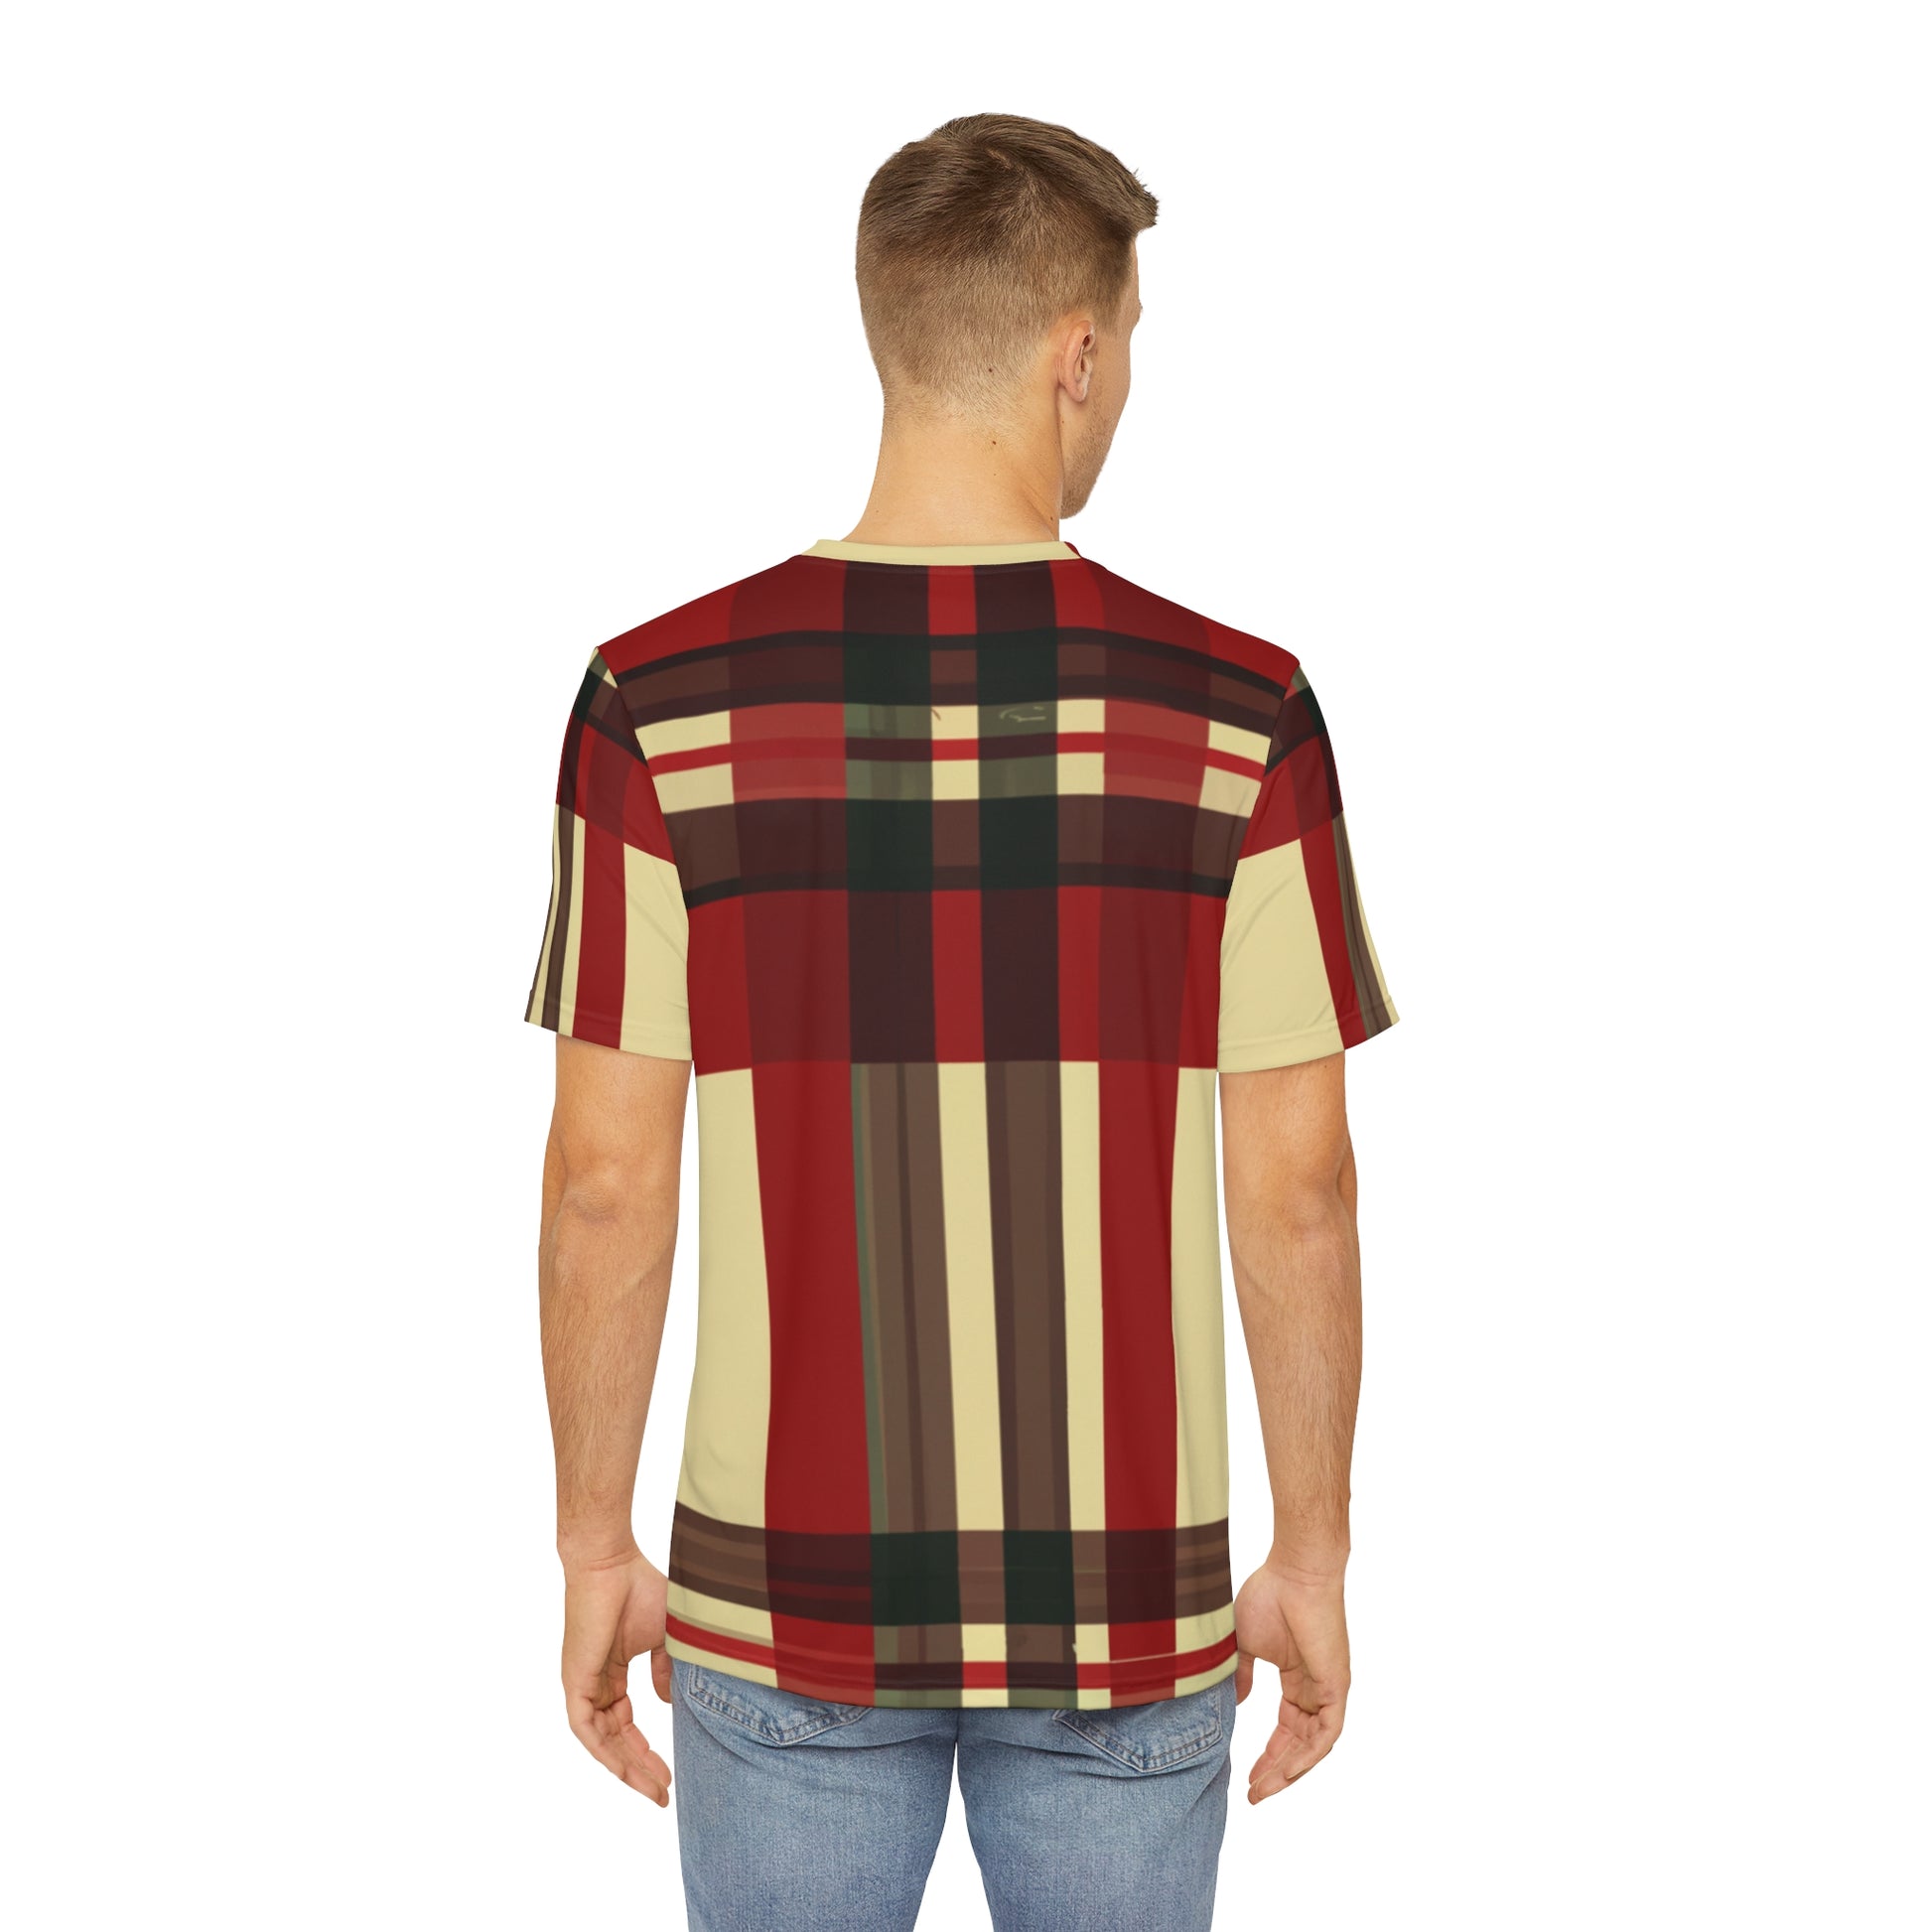 Back view of the Highland Ember Pixels Crewneck Pullover All-Over Print Short-Sleeved Shirt black red beige plaid pattern paired with casual denim pants worn by a white man